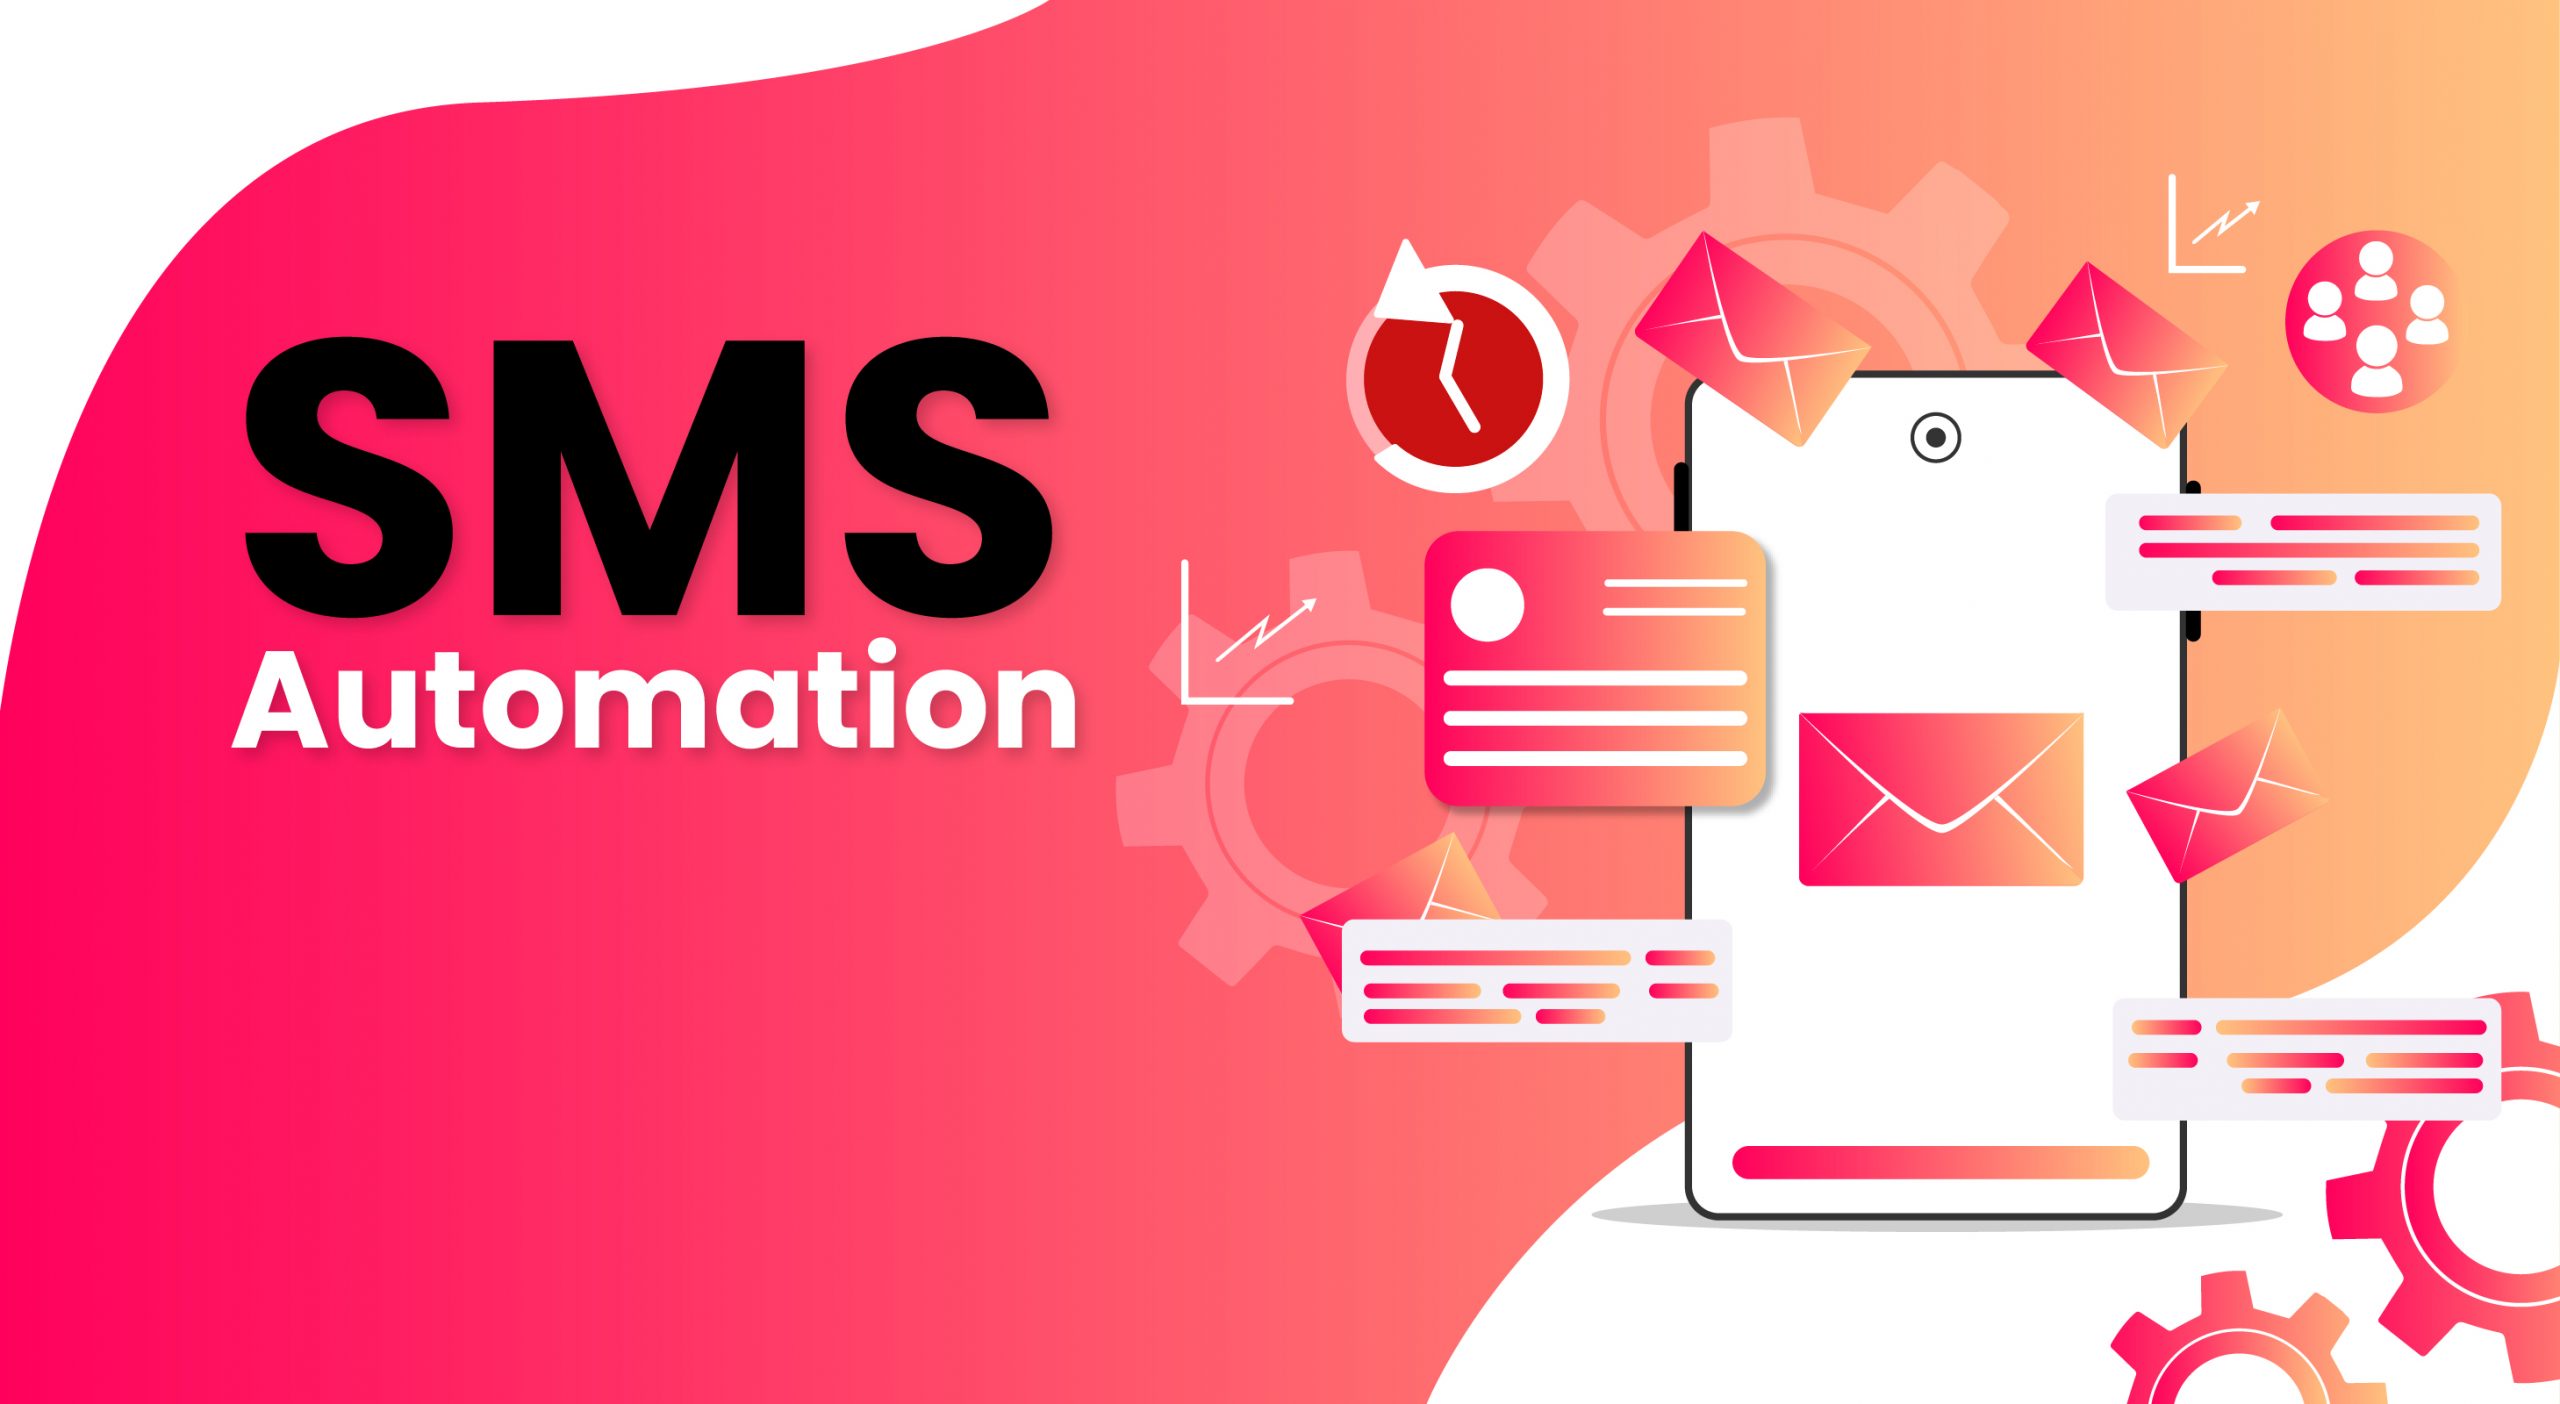 SMS Automation